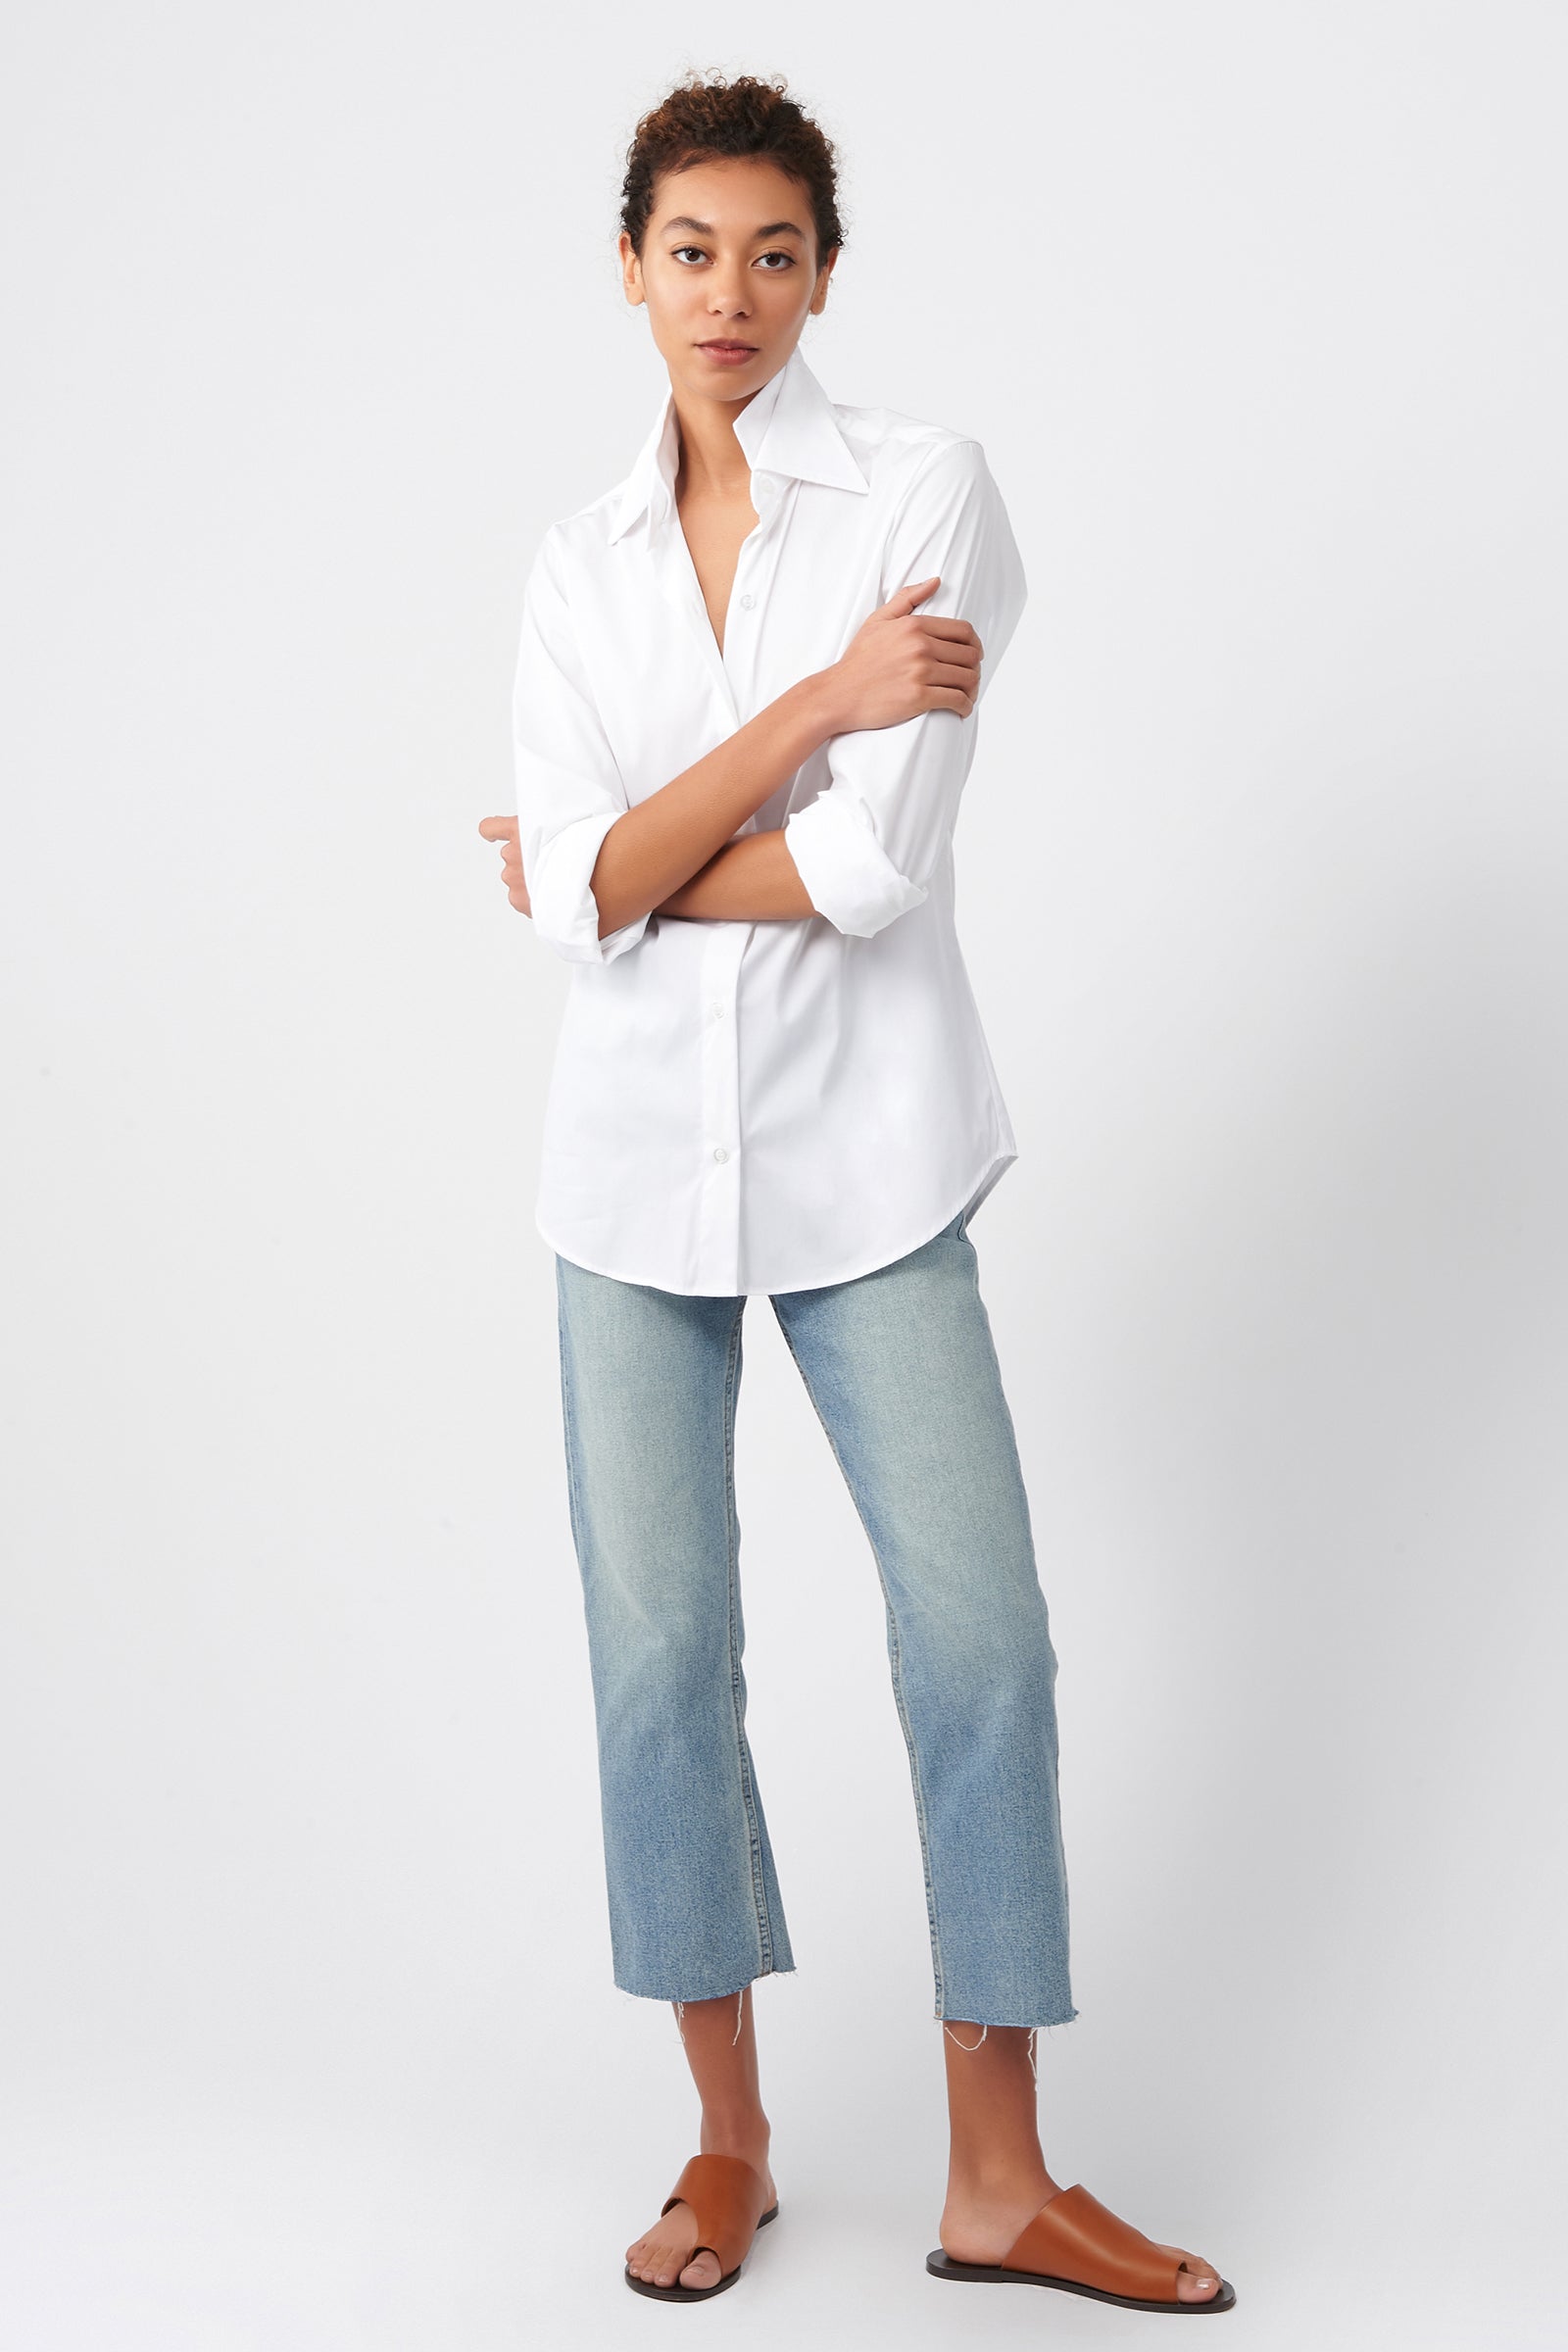 Kal Rieman Double Collar Shirt in White Cotton on Model Full Front Alternate View